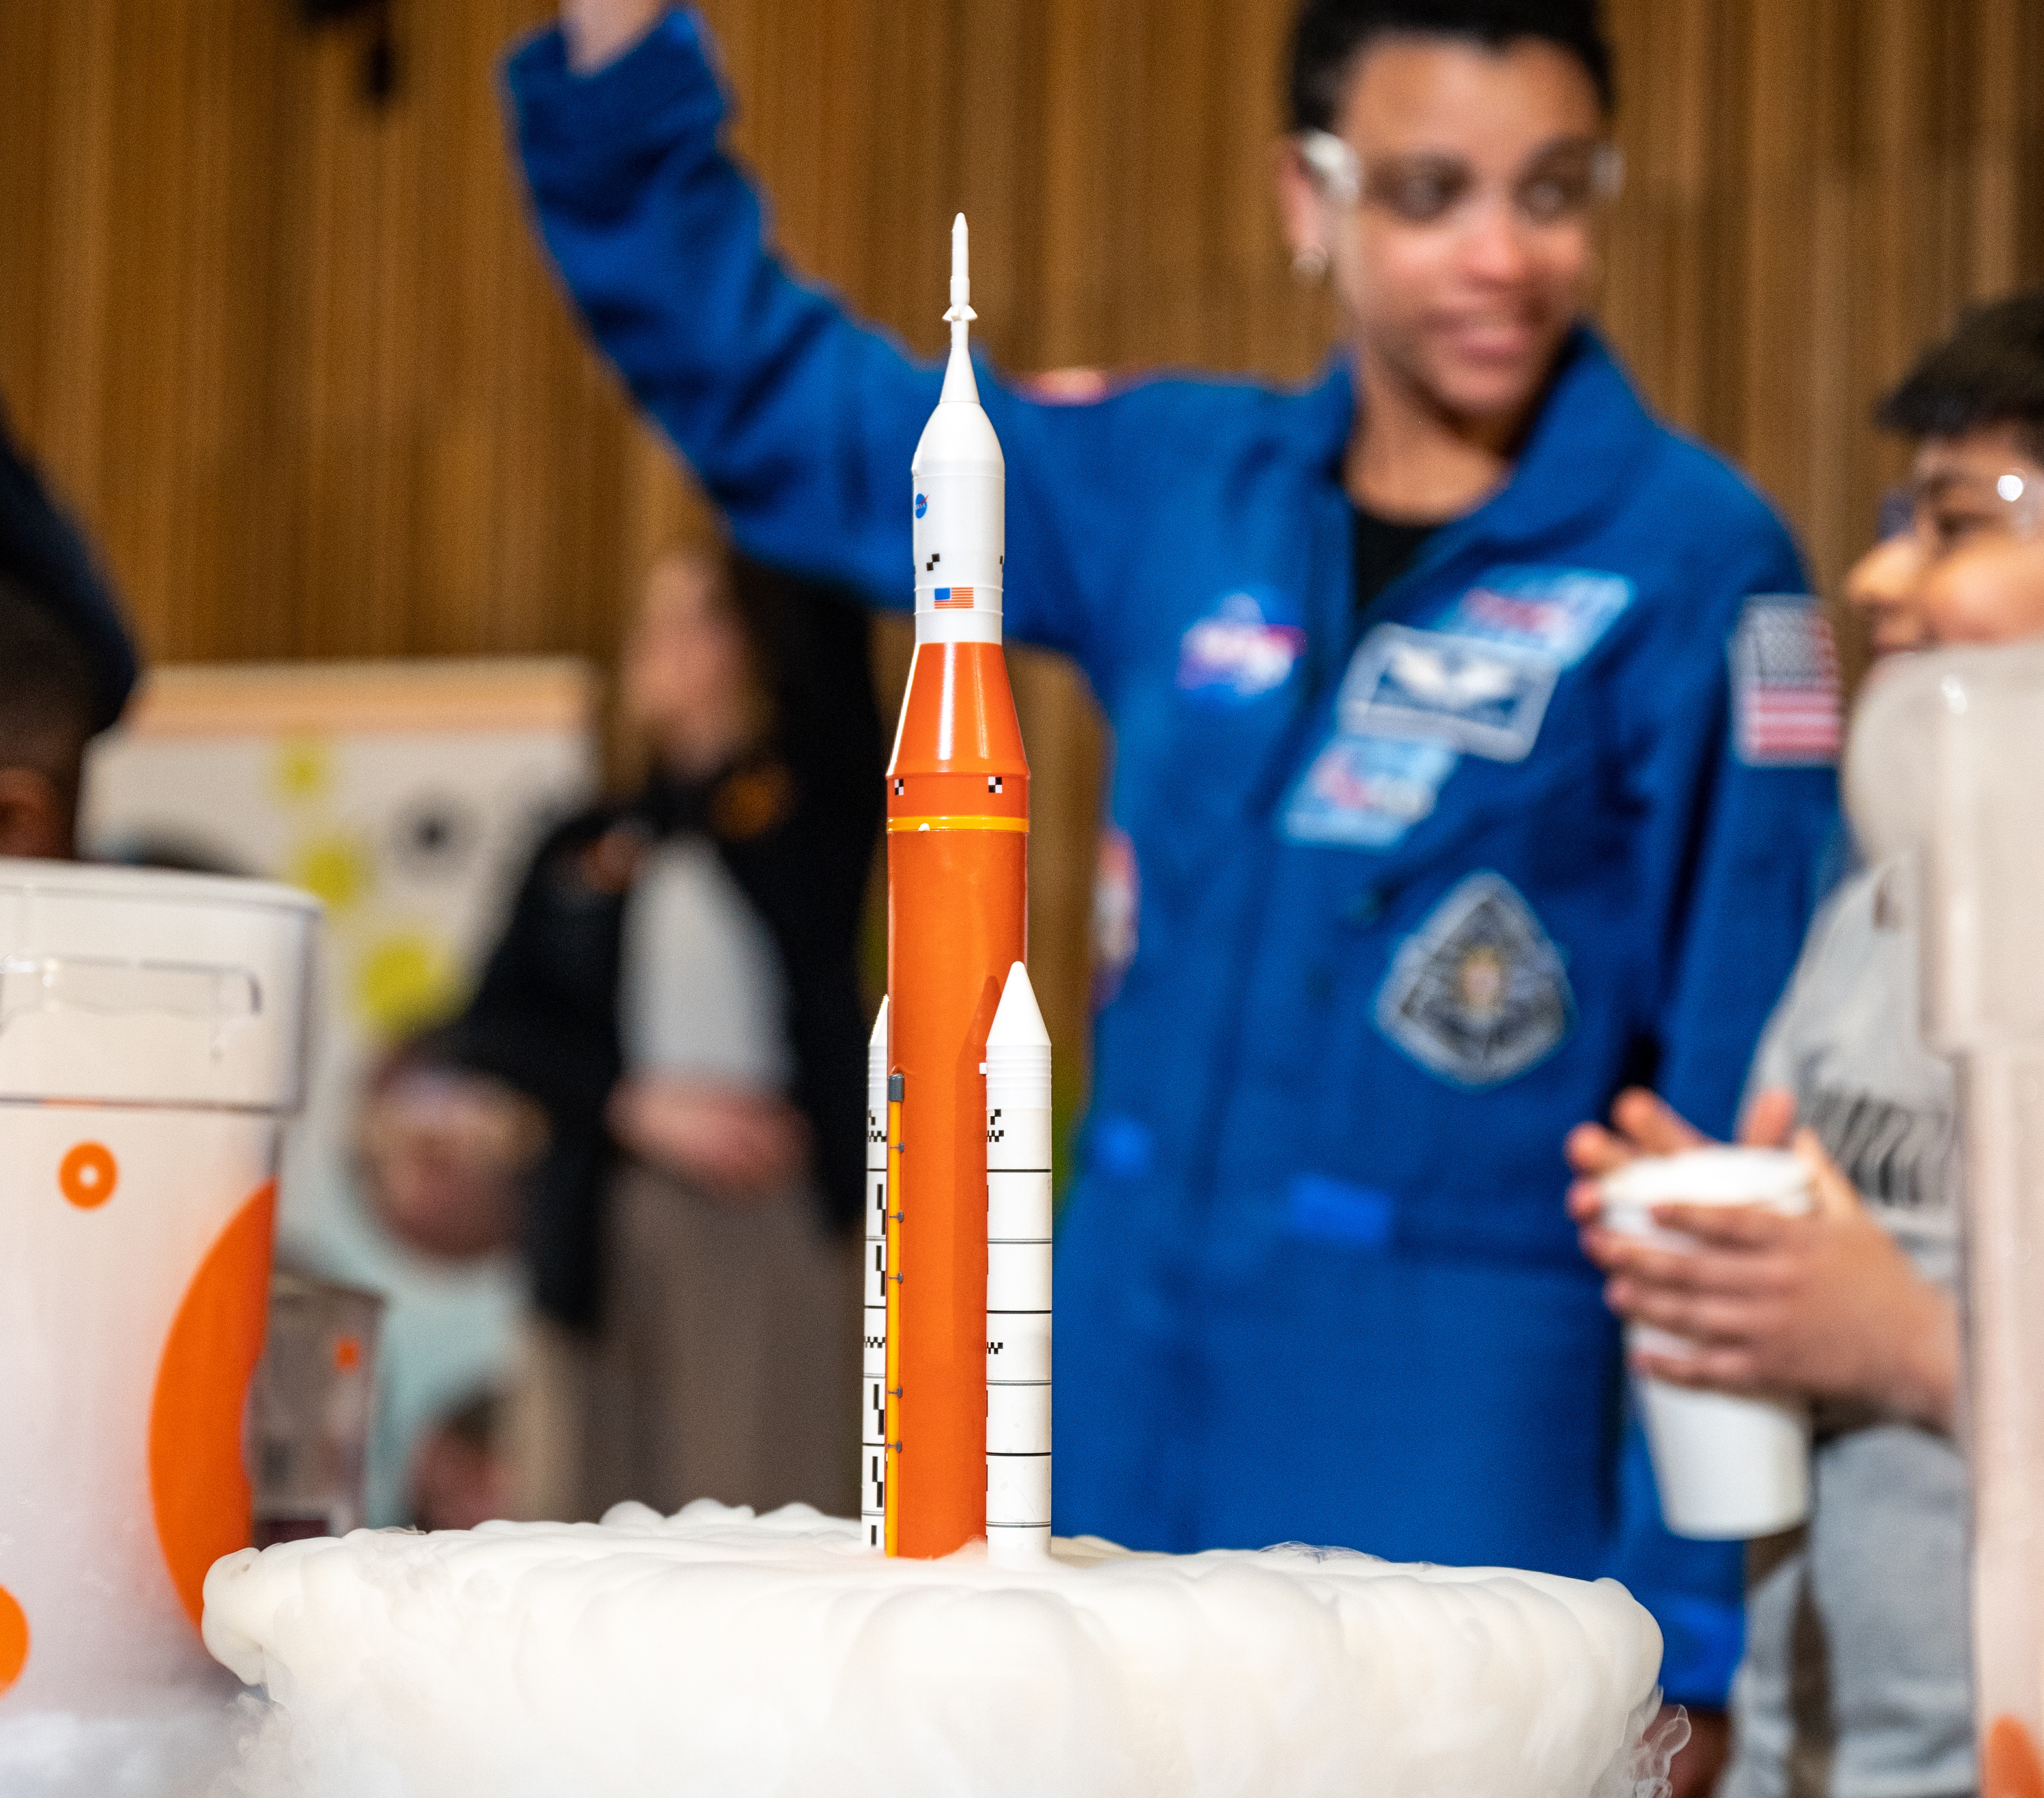 NASAs Artifact Module offers eligible recipients an opportunity to own a piece of NASA for their science, technology, engineering, and mathematics (STEM) educational outreach programs.